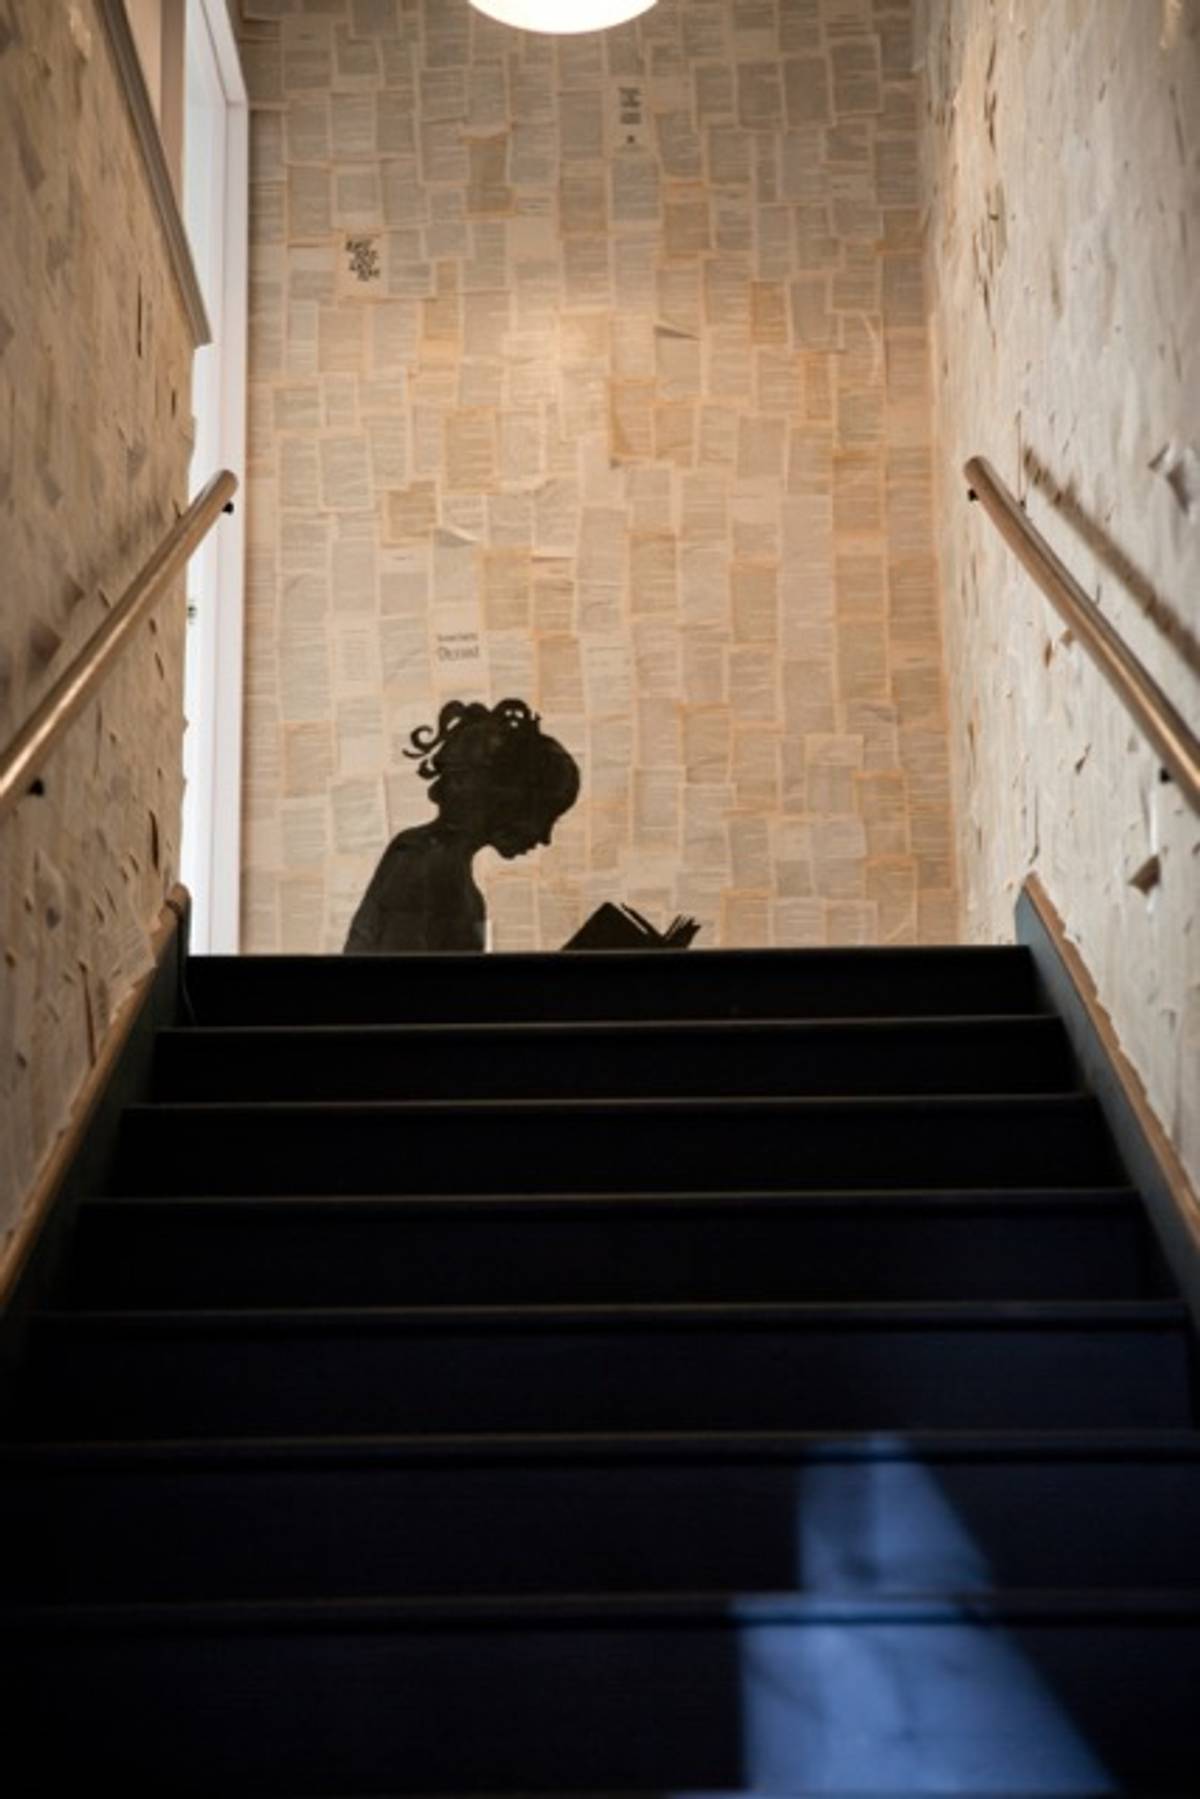 Staircase walls (to used book room) papered in old romance novel pages, with silhouette of reading girl, by Leah. (Image by Jenn LeBlanc)